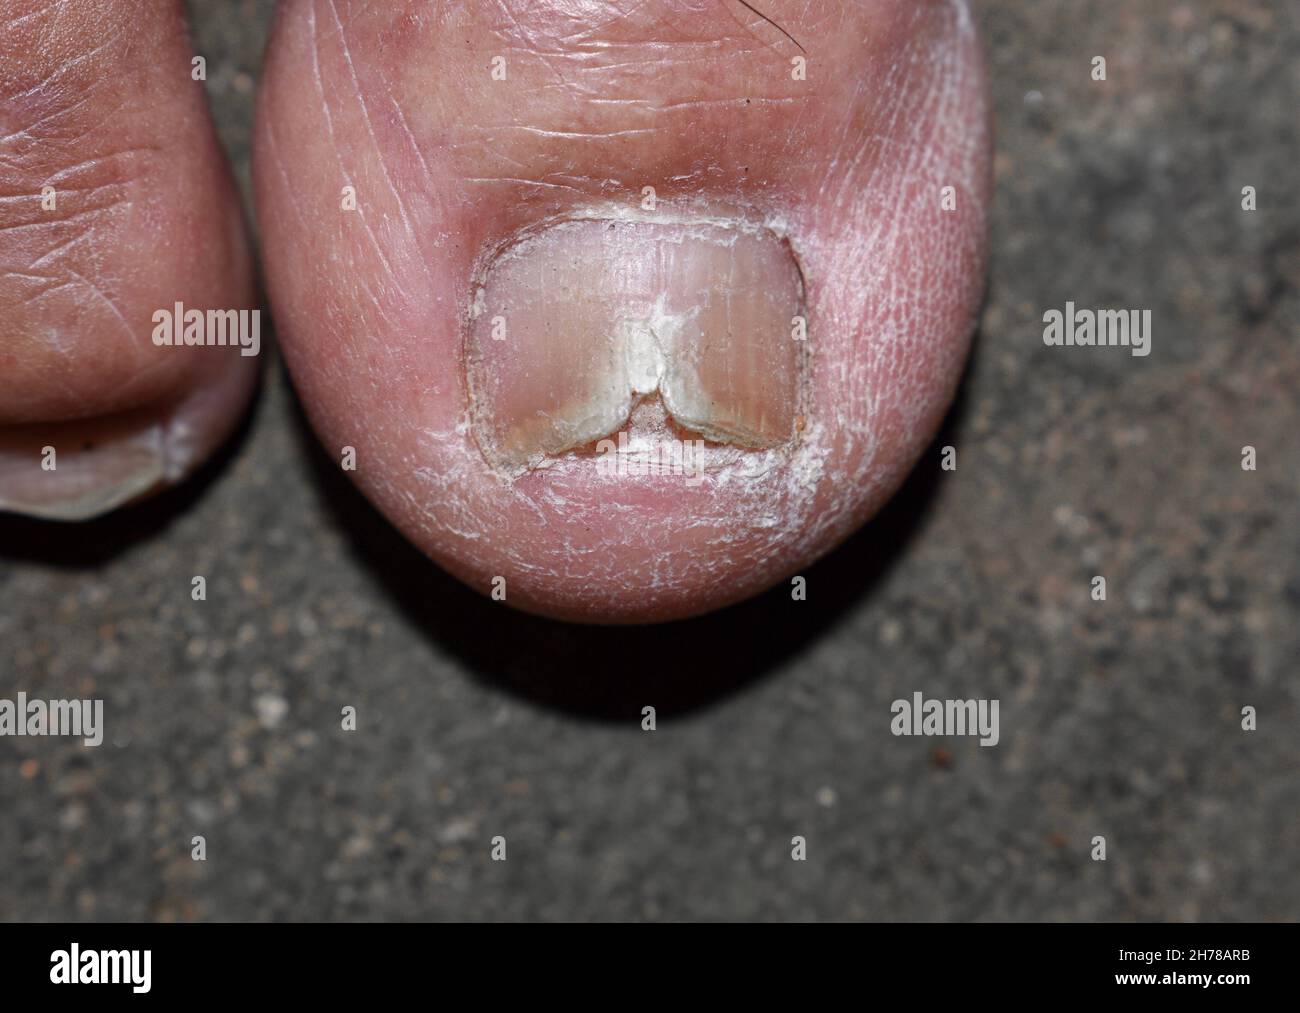 https://c8.alamy.com/comp/2H78ARB/damaged-and-cracked-toenail-fungal-nail-infection-onychomycosis-also-called-tinea-unguium-2H78ARB.jpg